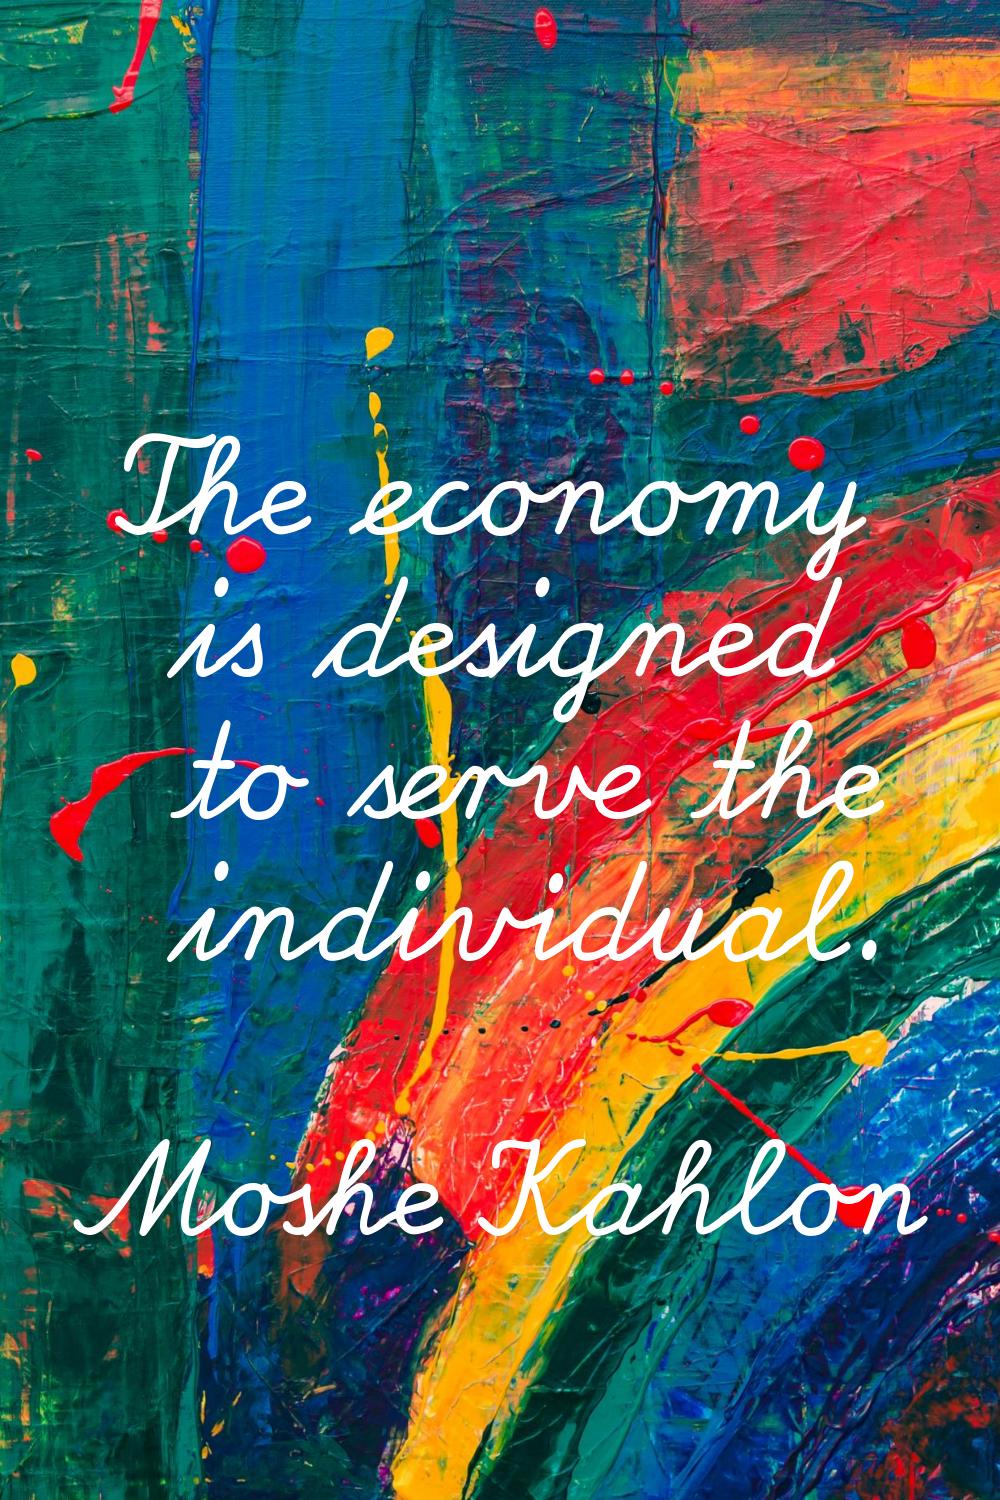 The economy is designed to serve the individual.